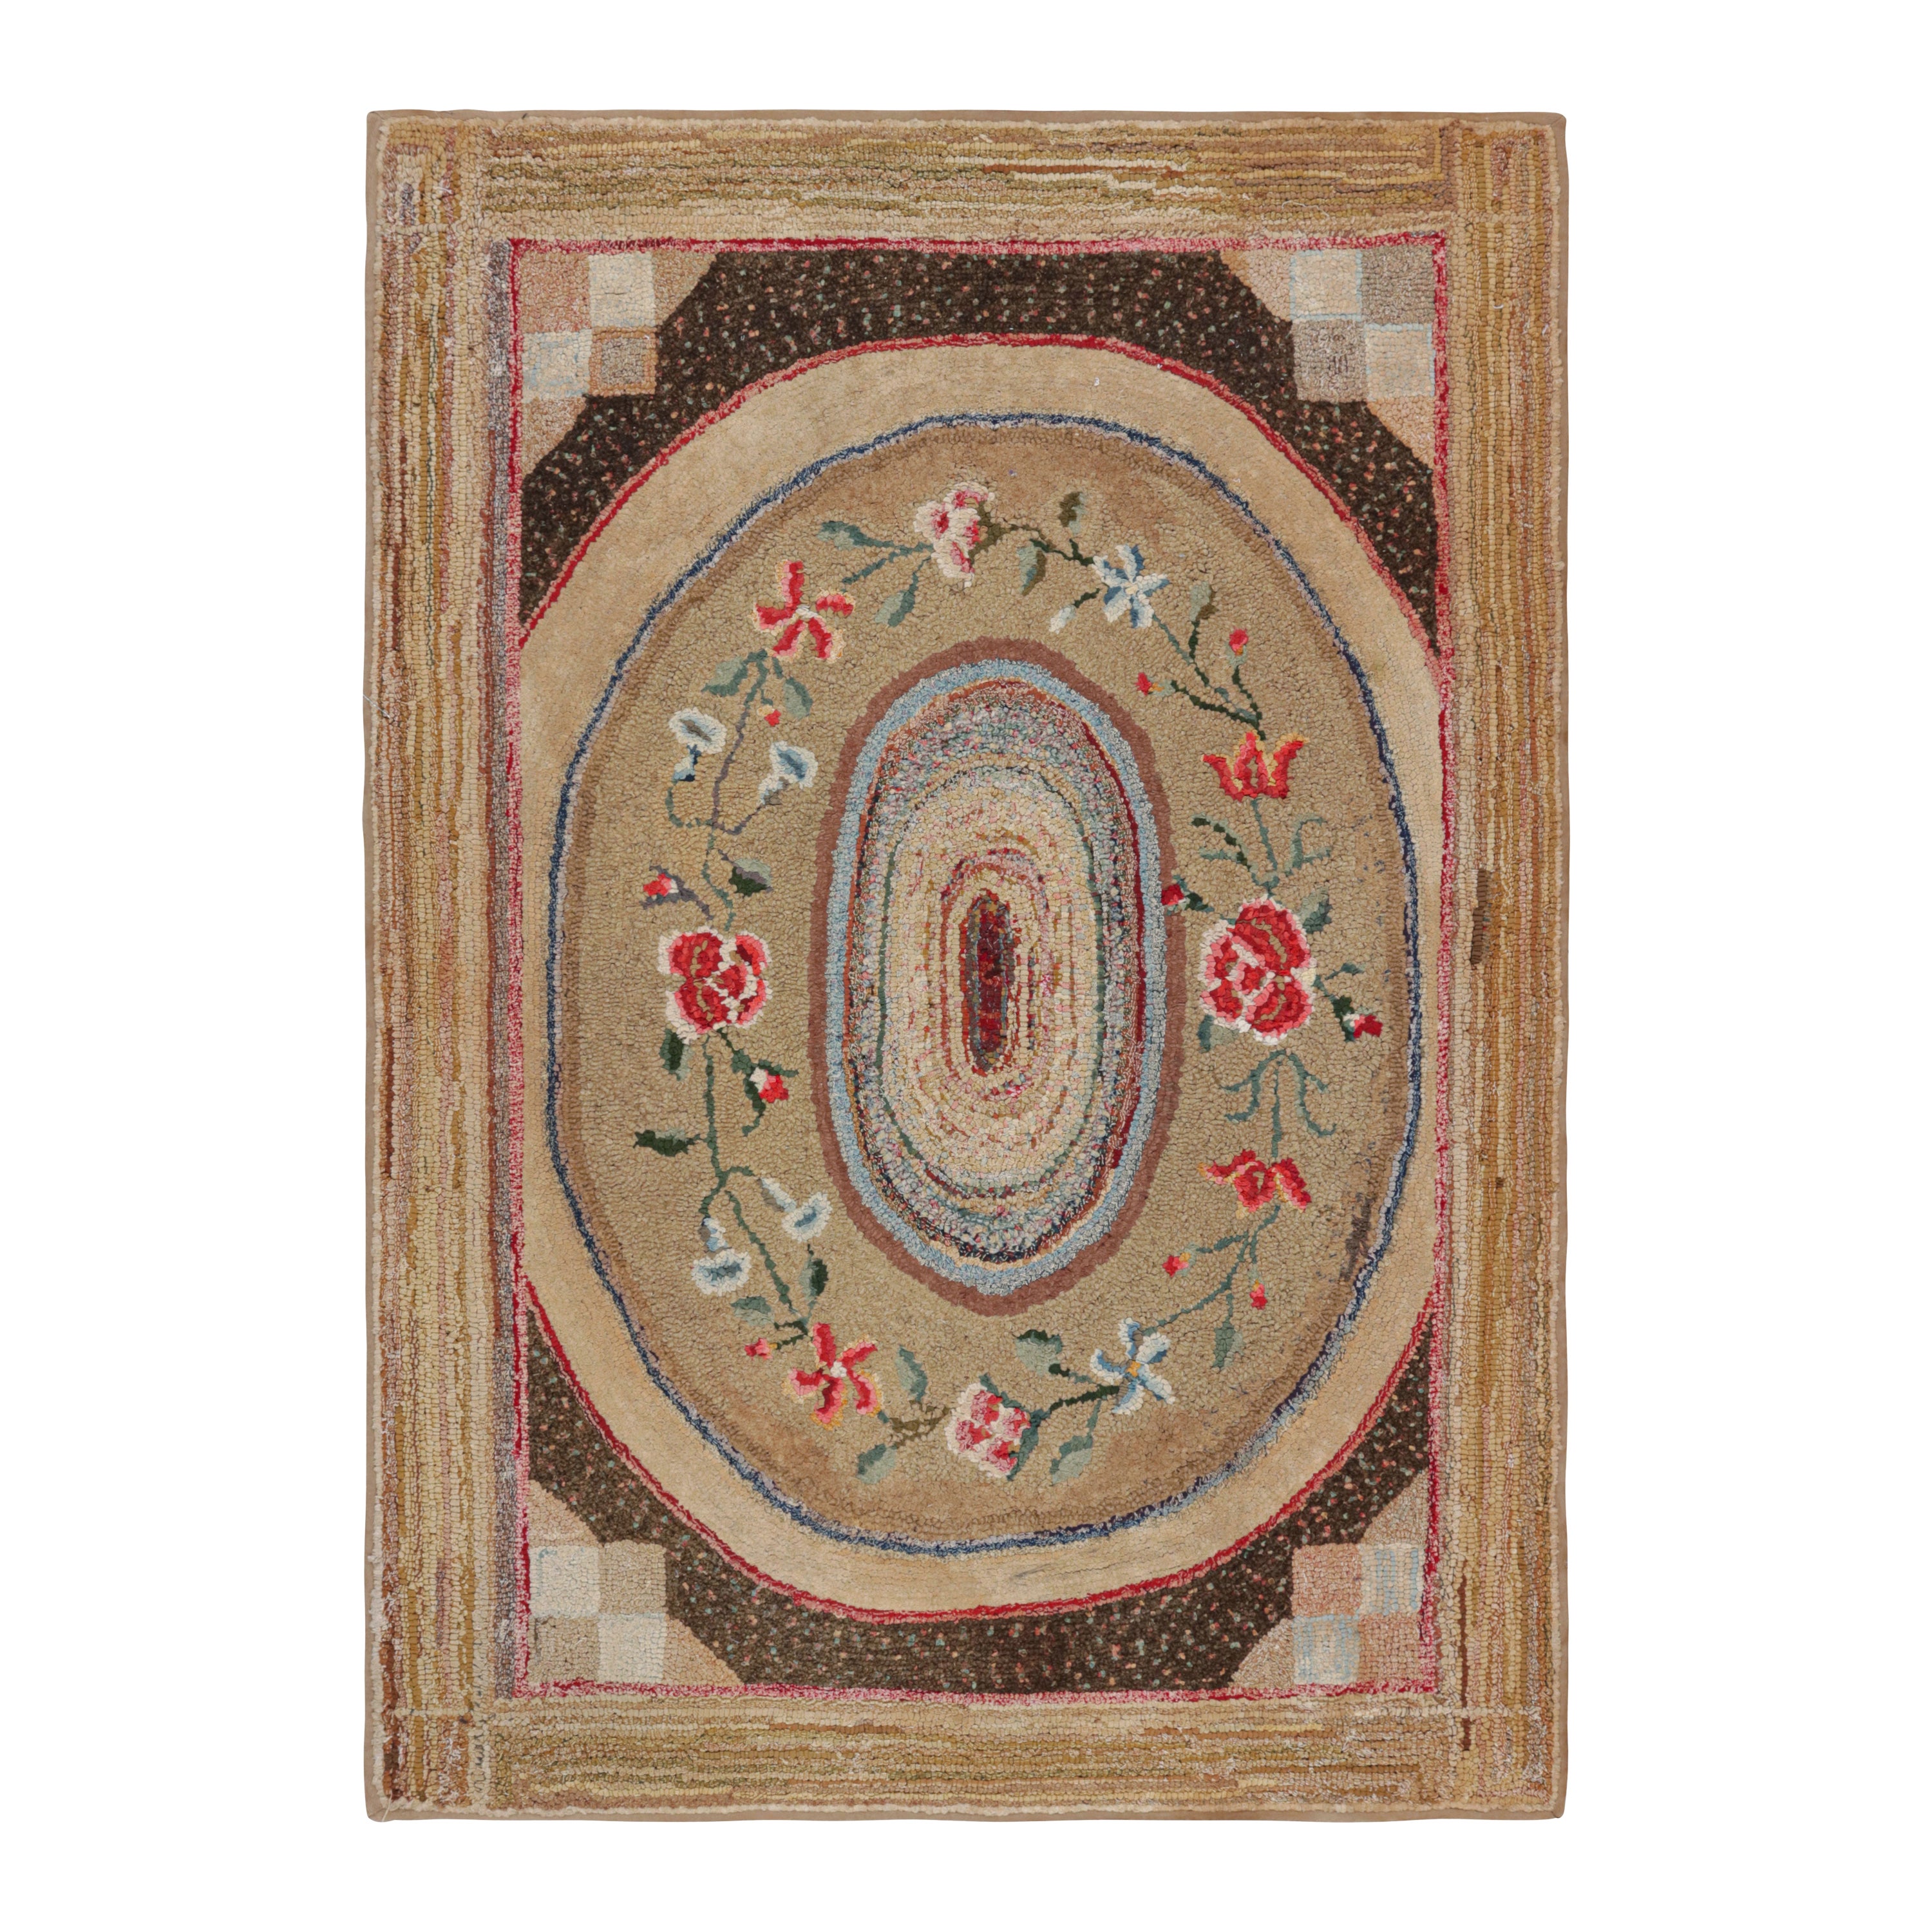 Antique Hooked Rug in Brown, with Floral Patterns, from Rug & Kilim For Sale